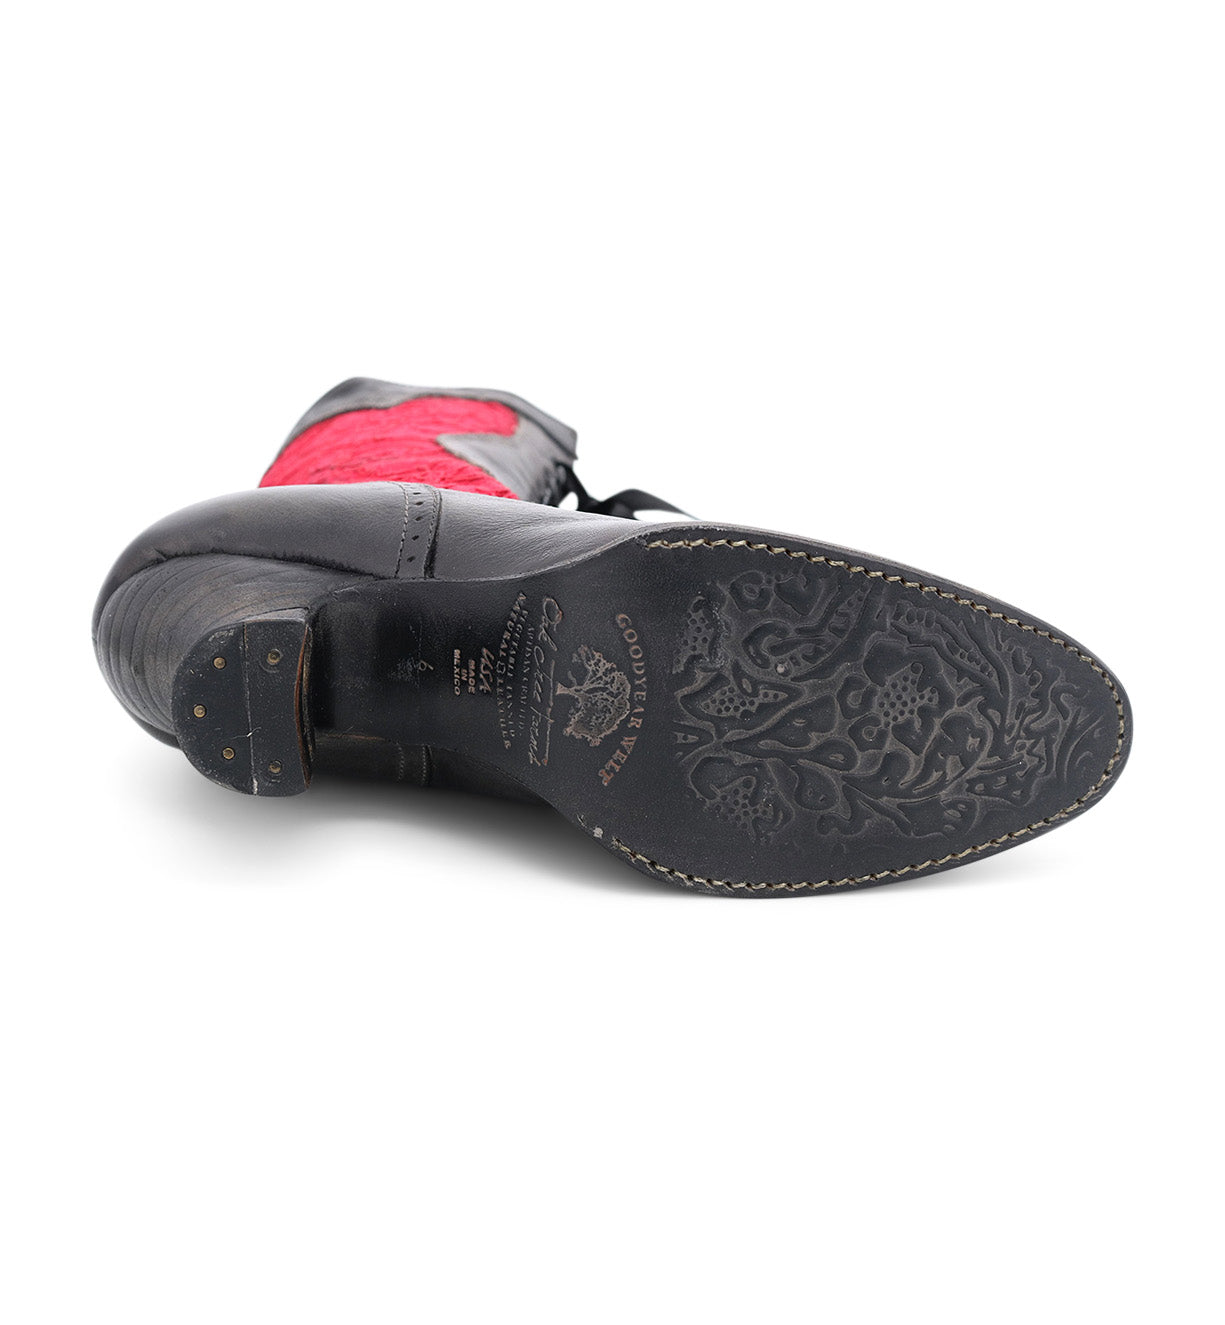 A pair of charming black and red handmade Abigale shoes with an Oak Tree Farms red sole.